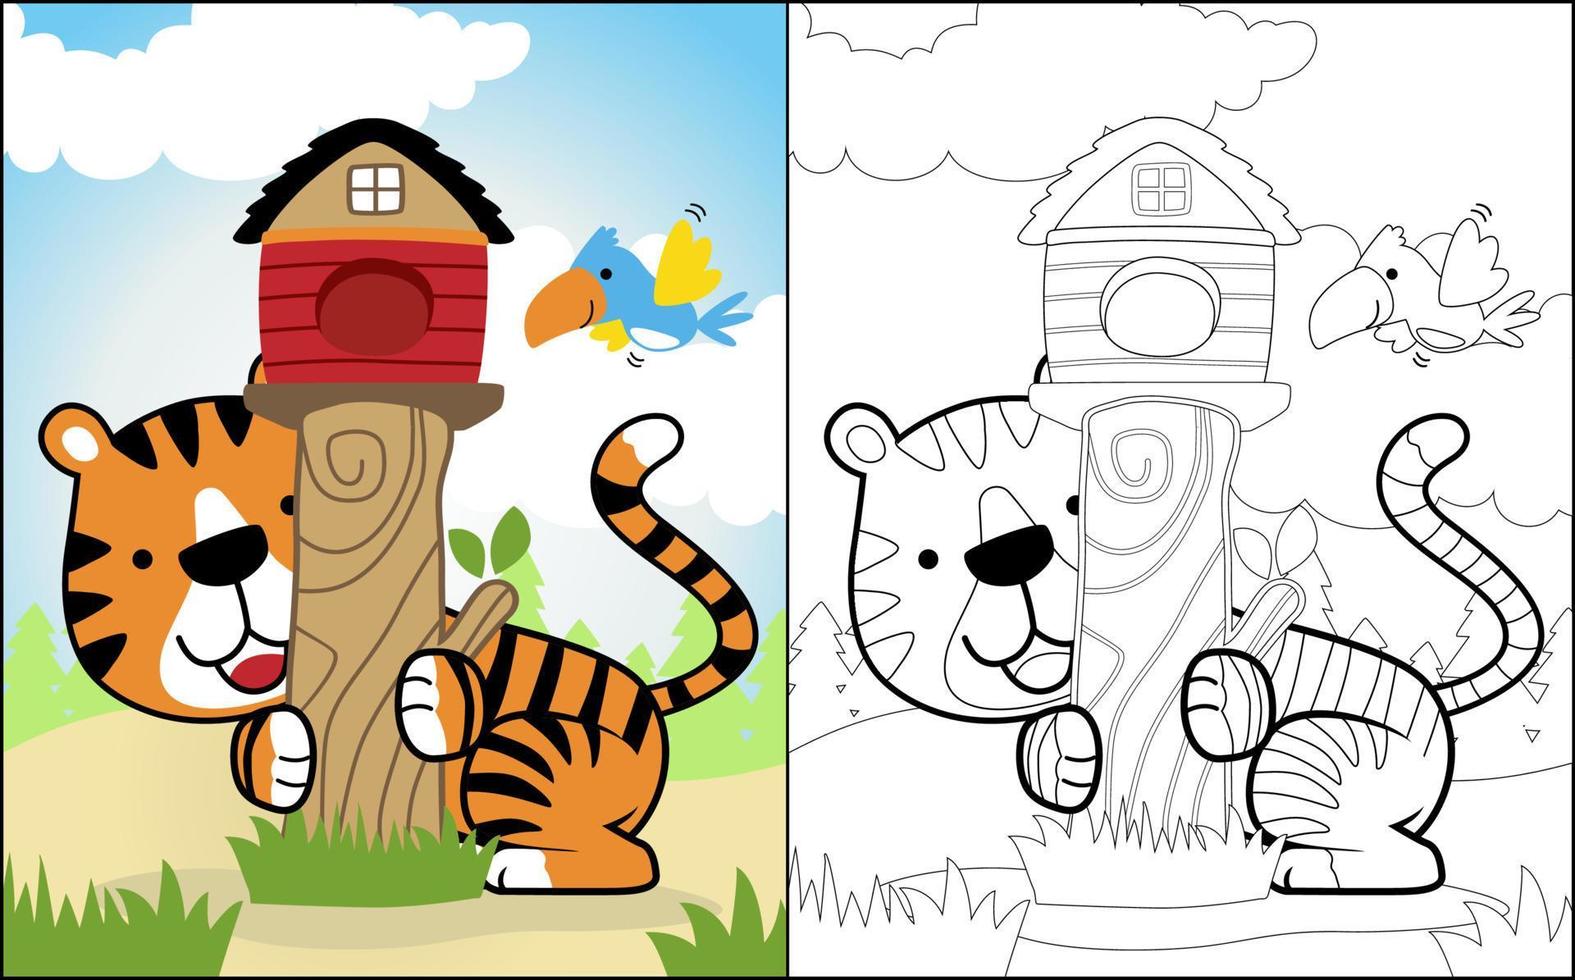 Coloring book or page of funny animals cartoon, tiger playing with bird in forest, birds cage on tree stump vector